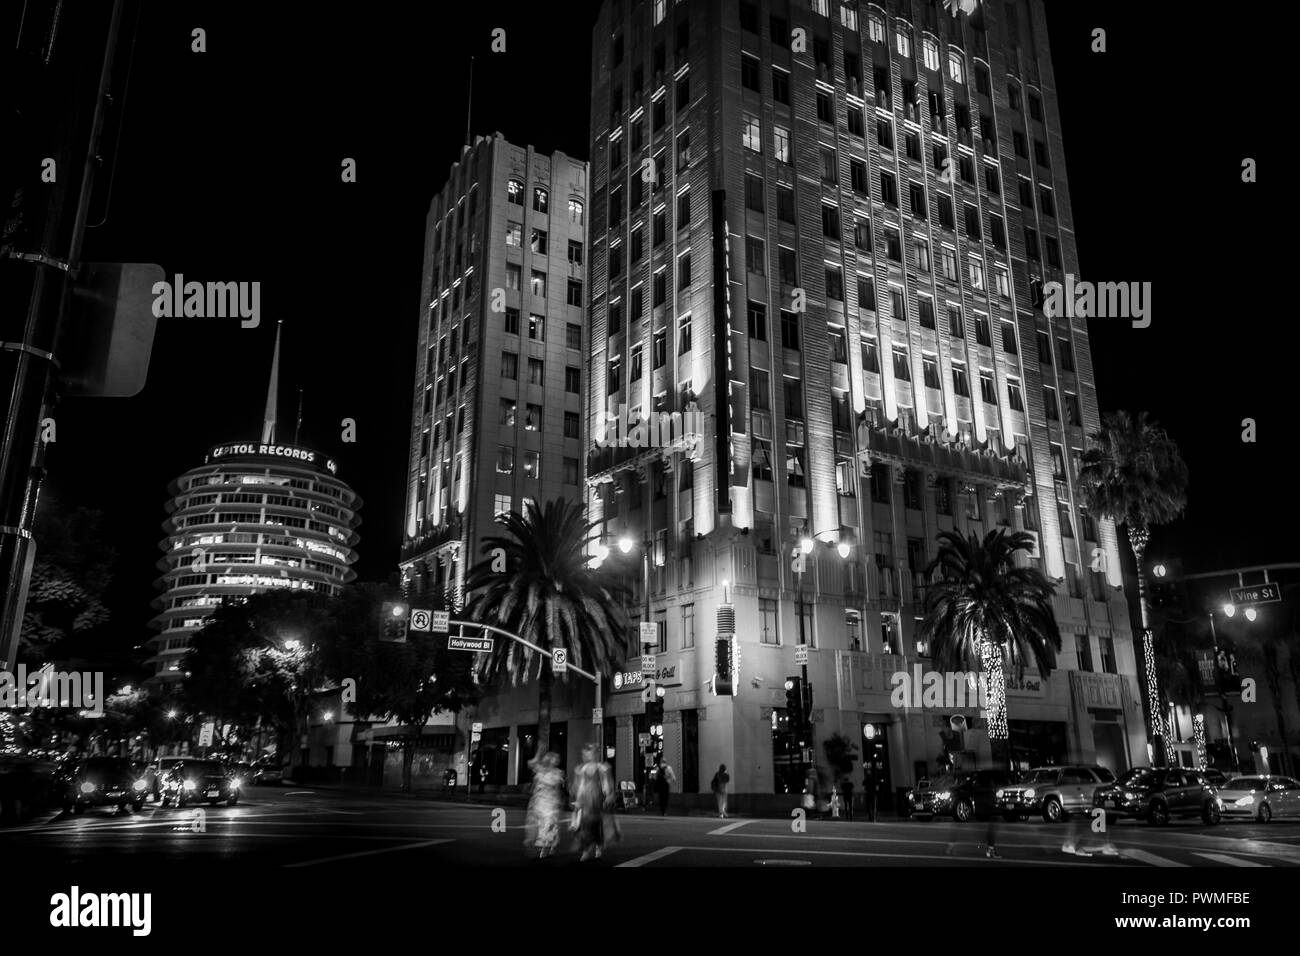 Hollywood & Vine, Hollywood, CA Banque D'Images